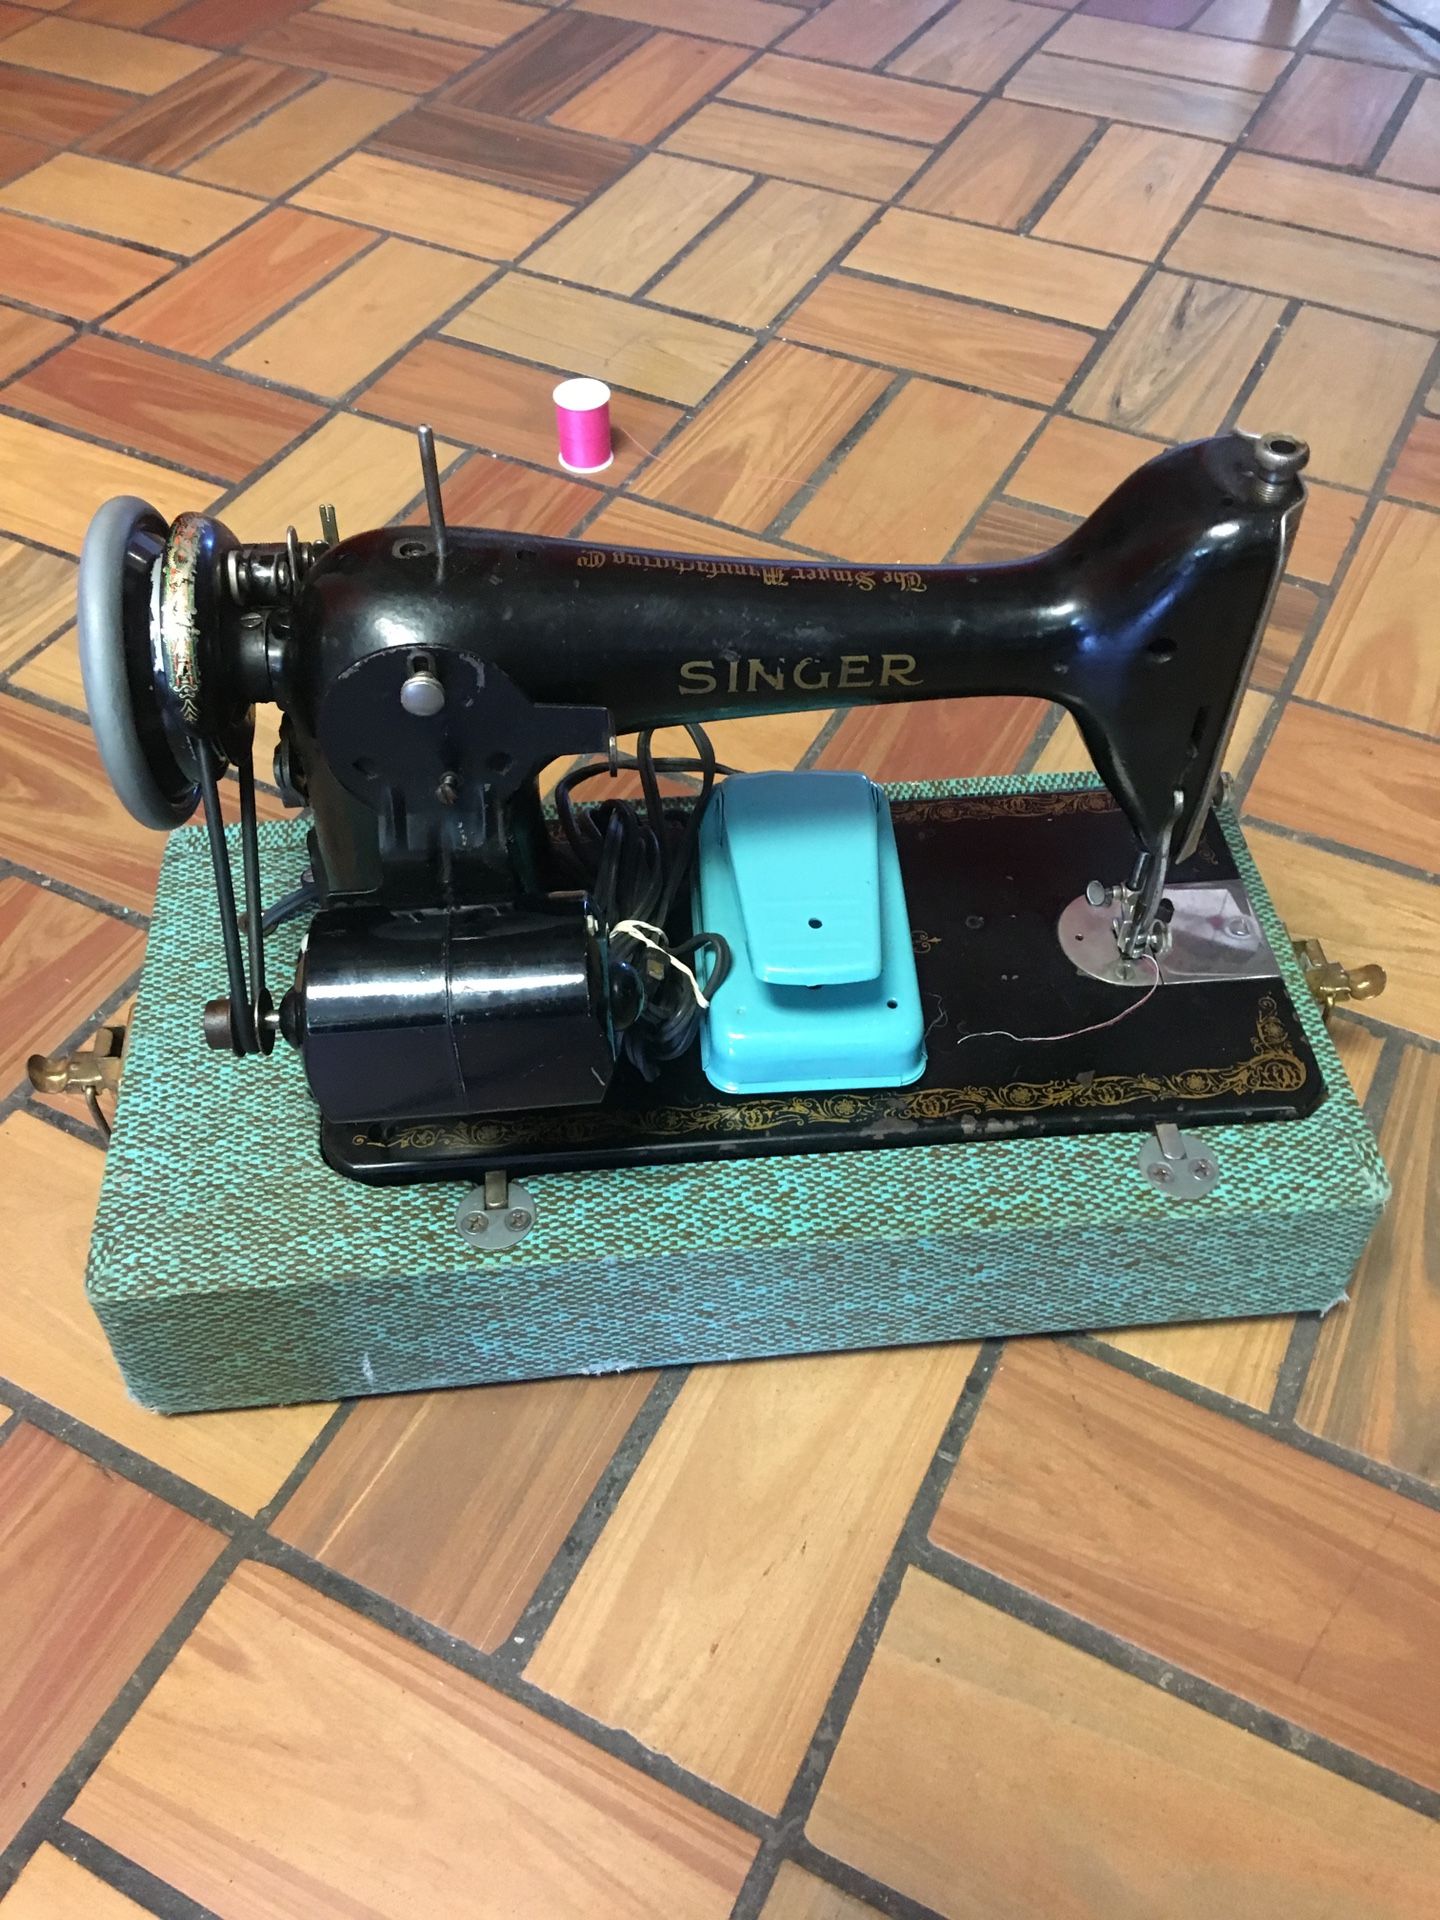 Vintage Singer Sewing Machine (From 1900s)